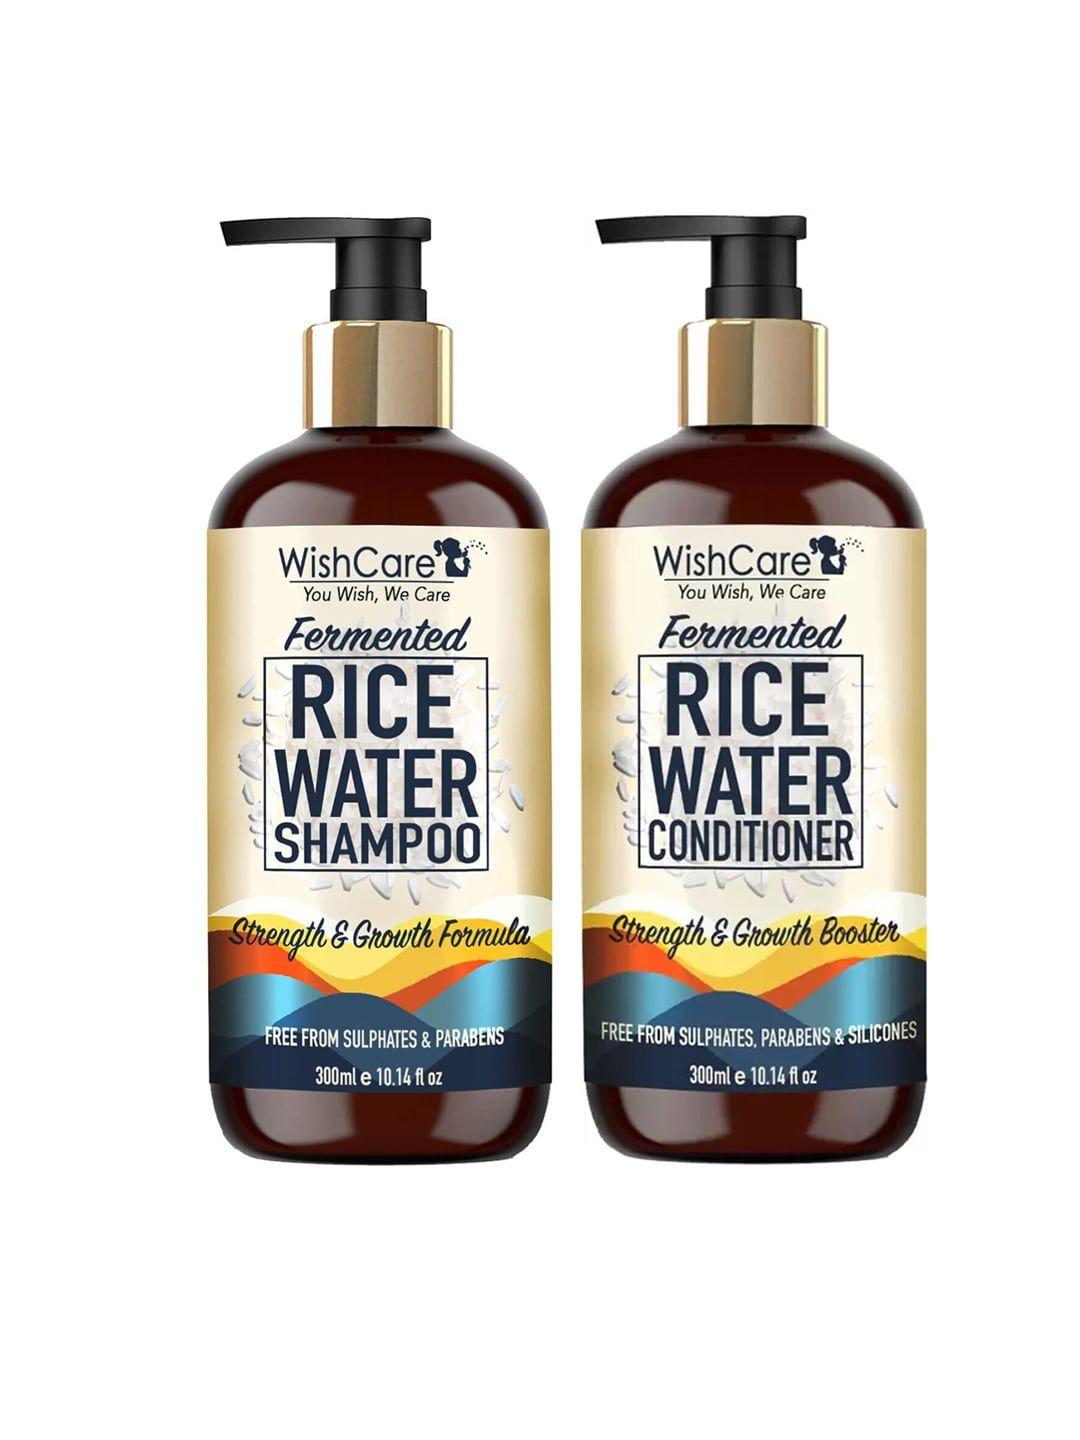 wishcare fermented rice water shampoo & conditioner